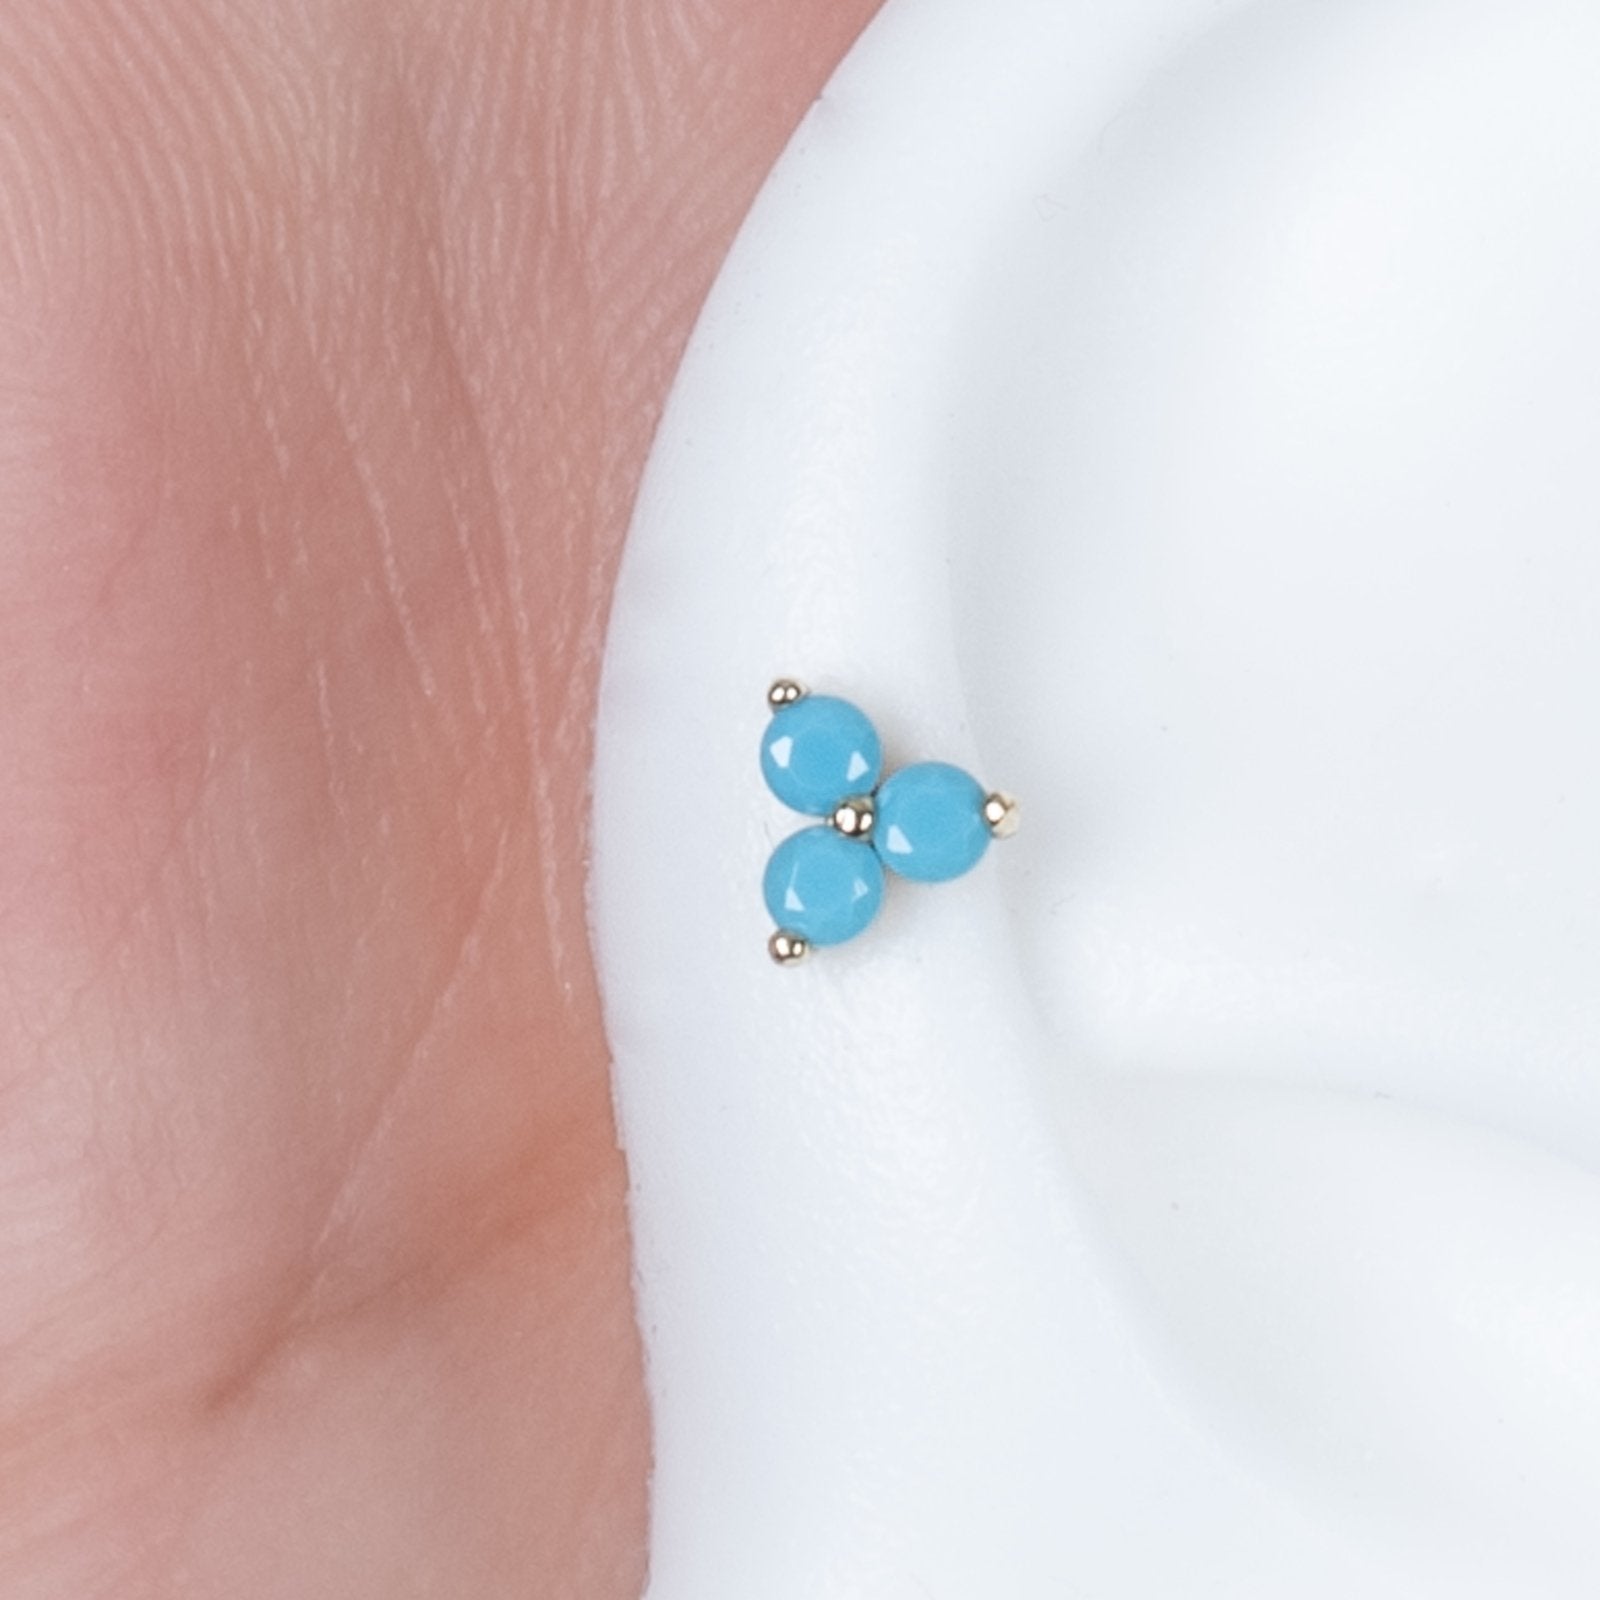 Turquoise Trinity Cluster Stud Earrings Earrings Estella Collection #product_description# 14k Birthstone Earrings #tag4# #tag5# #tag6# #tag7# #tag8# #tag9# #tag10#